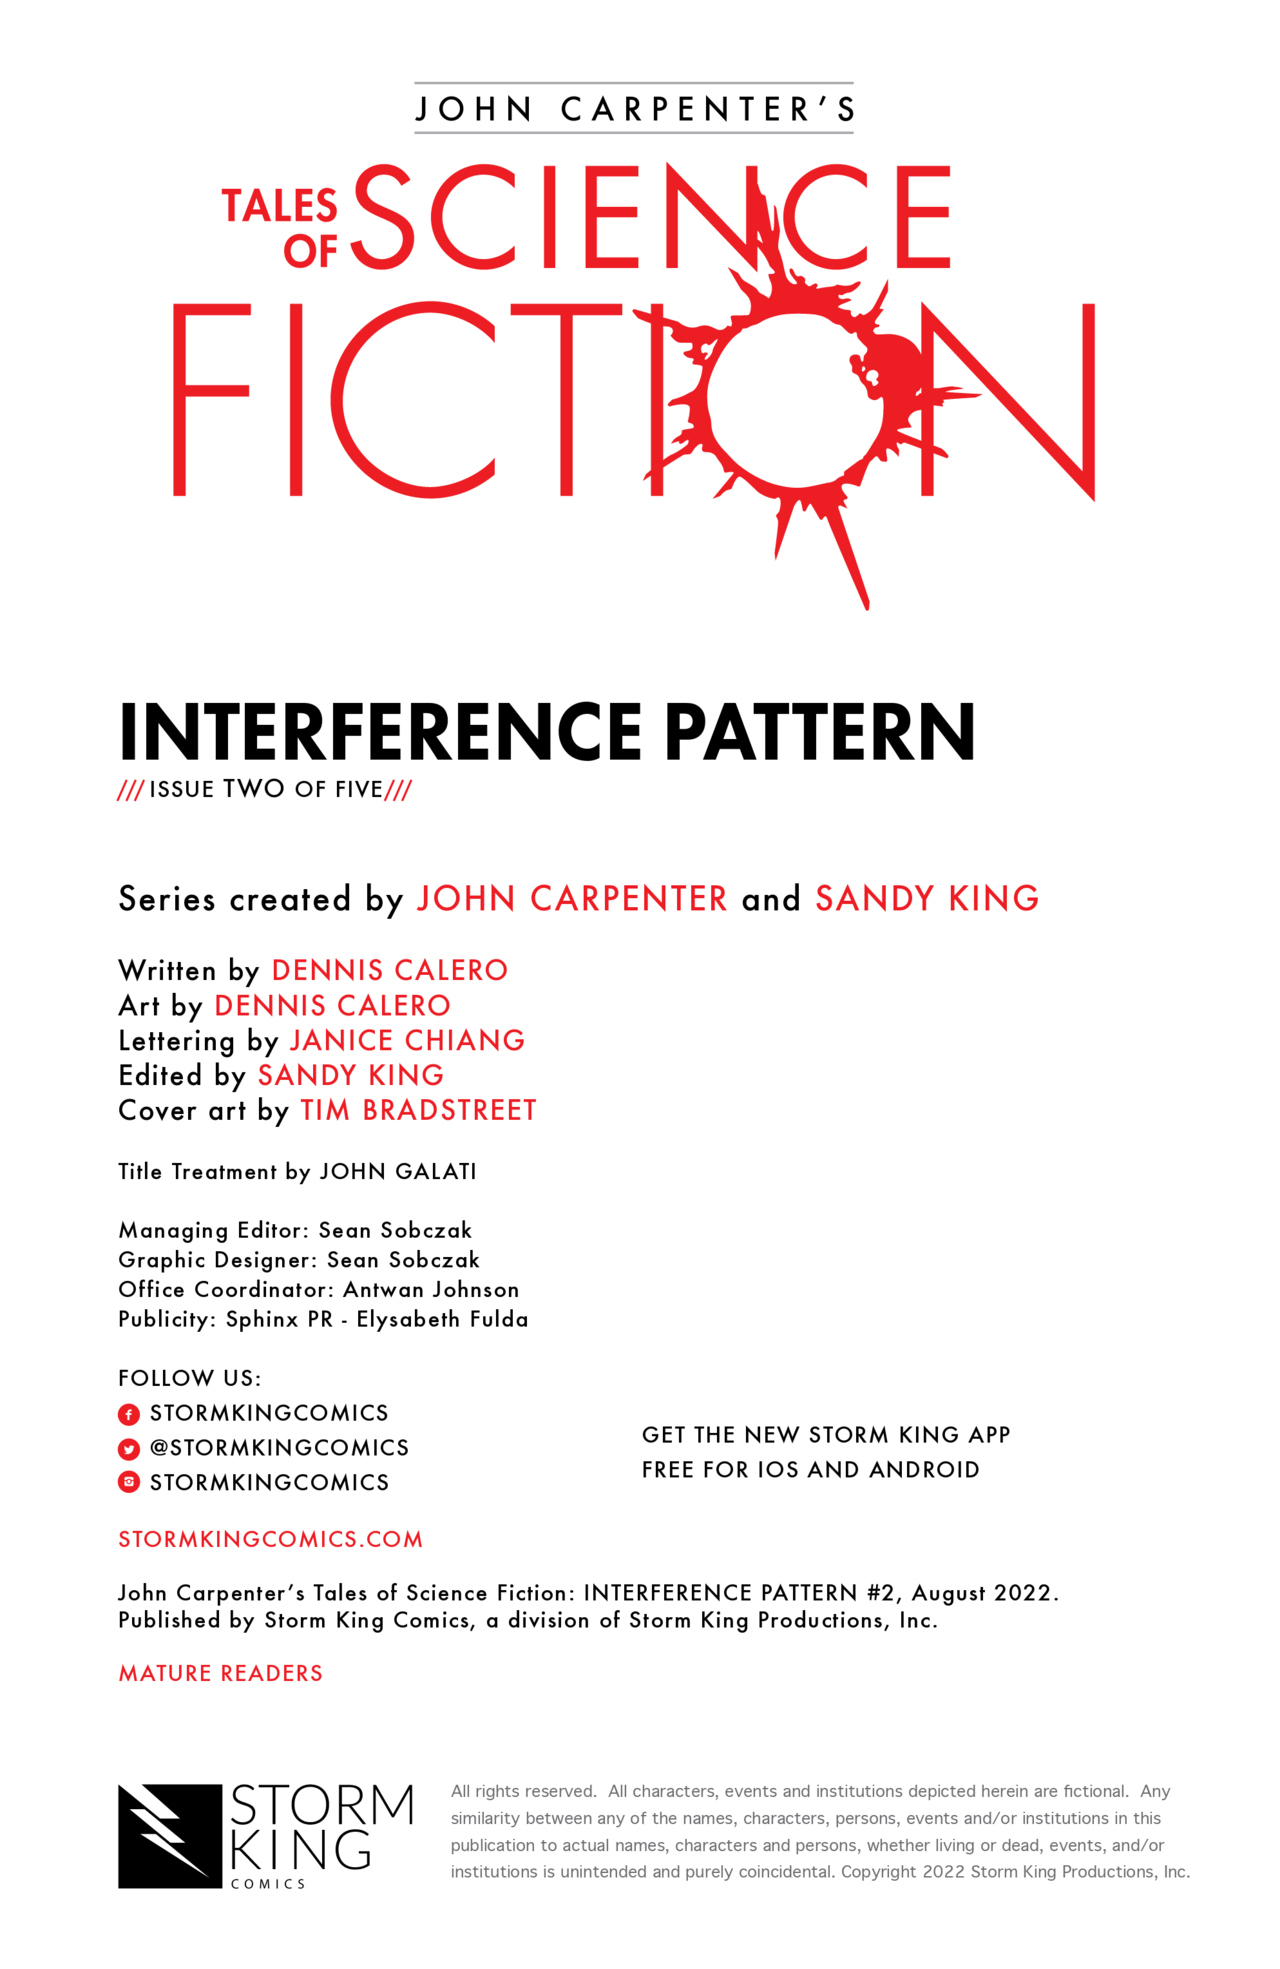 Read online Tales of Science Fiction: Interference Pattern comic -  Issue #2 - 2